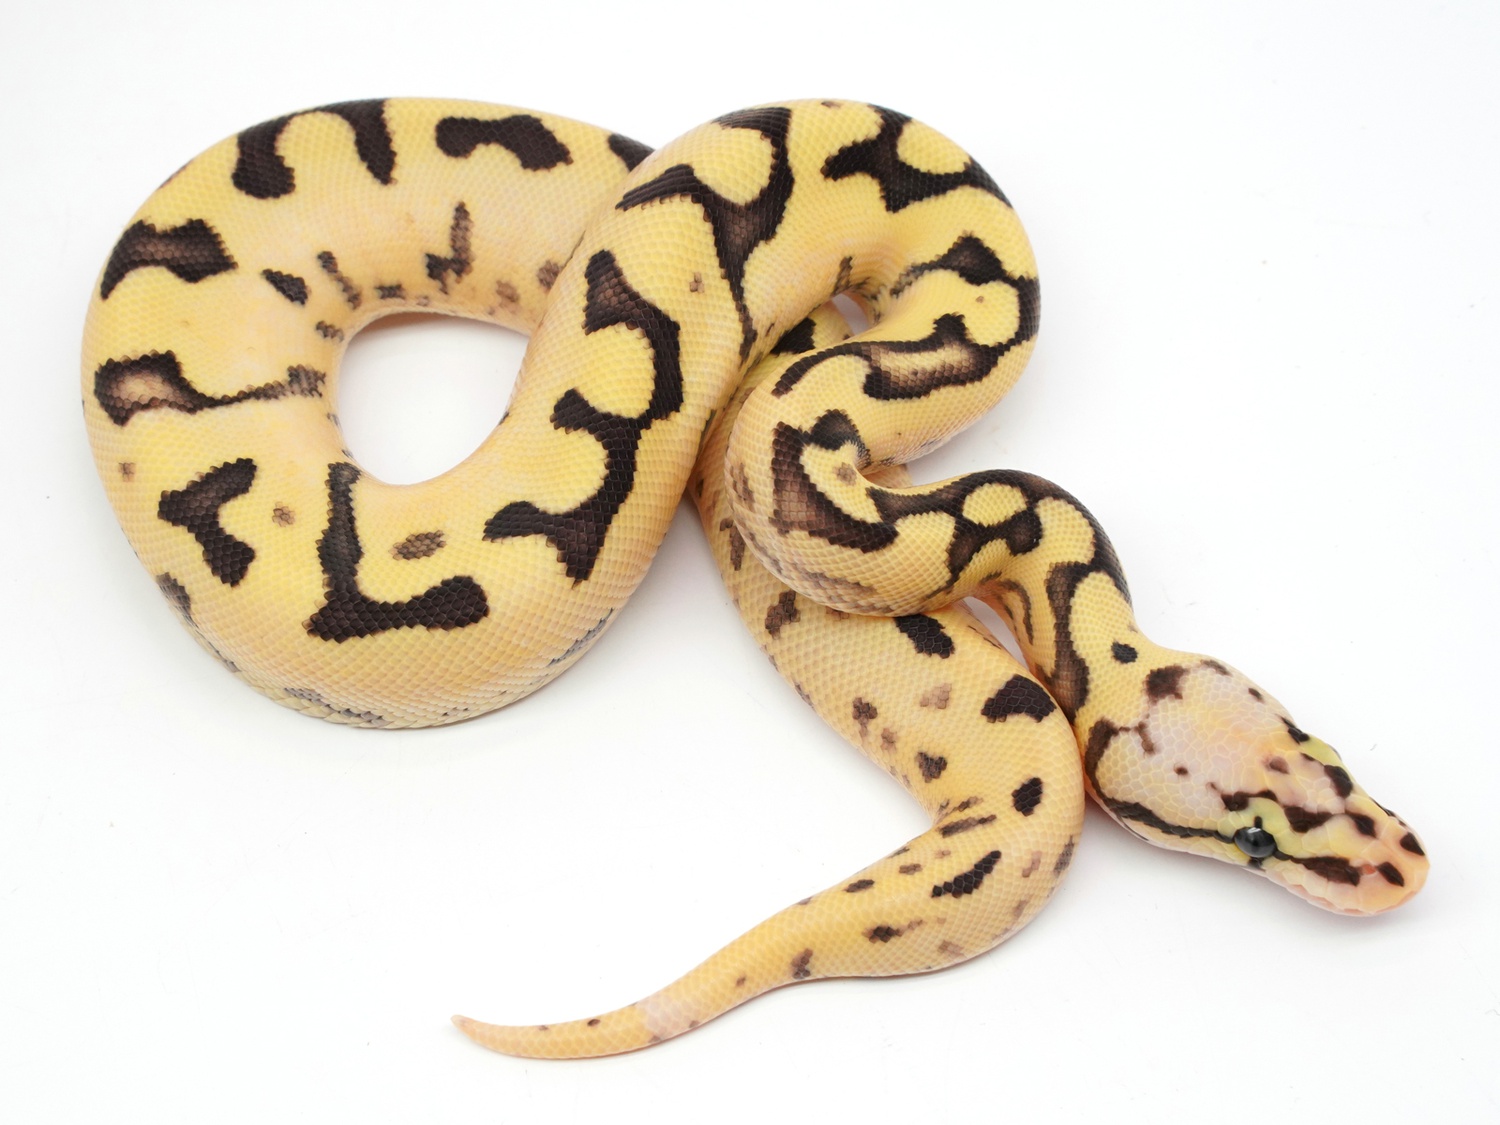 Bumble Bee Woma Lucifer Bald Orange Dream Poss Het Pied Ball Python by New England Reptile Distributors